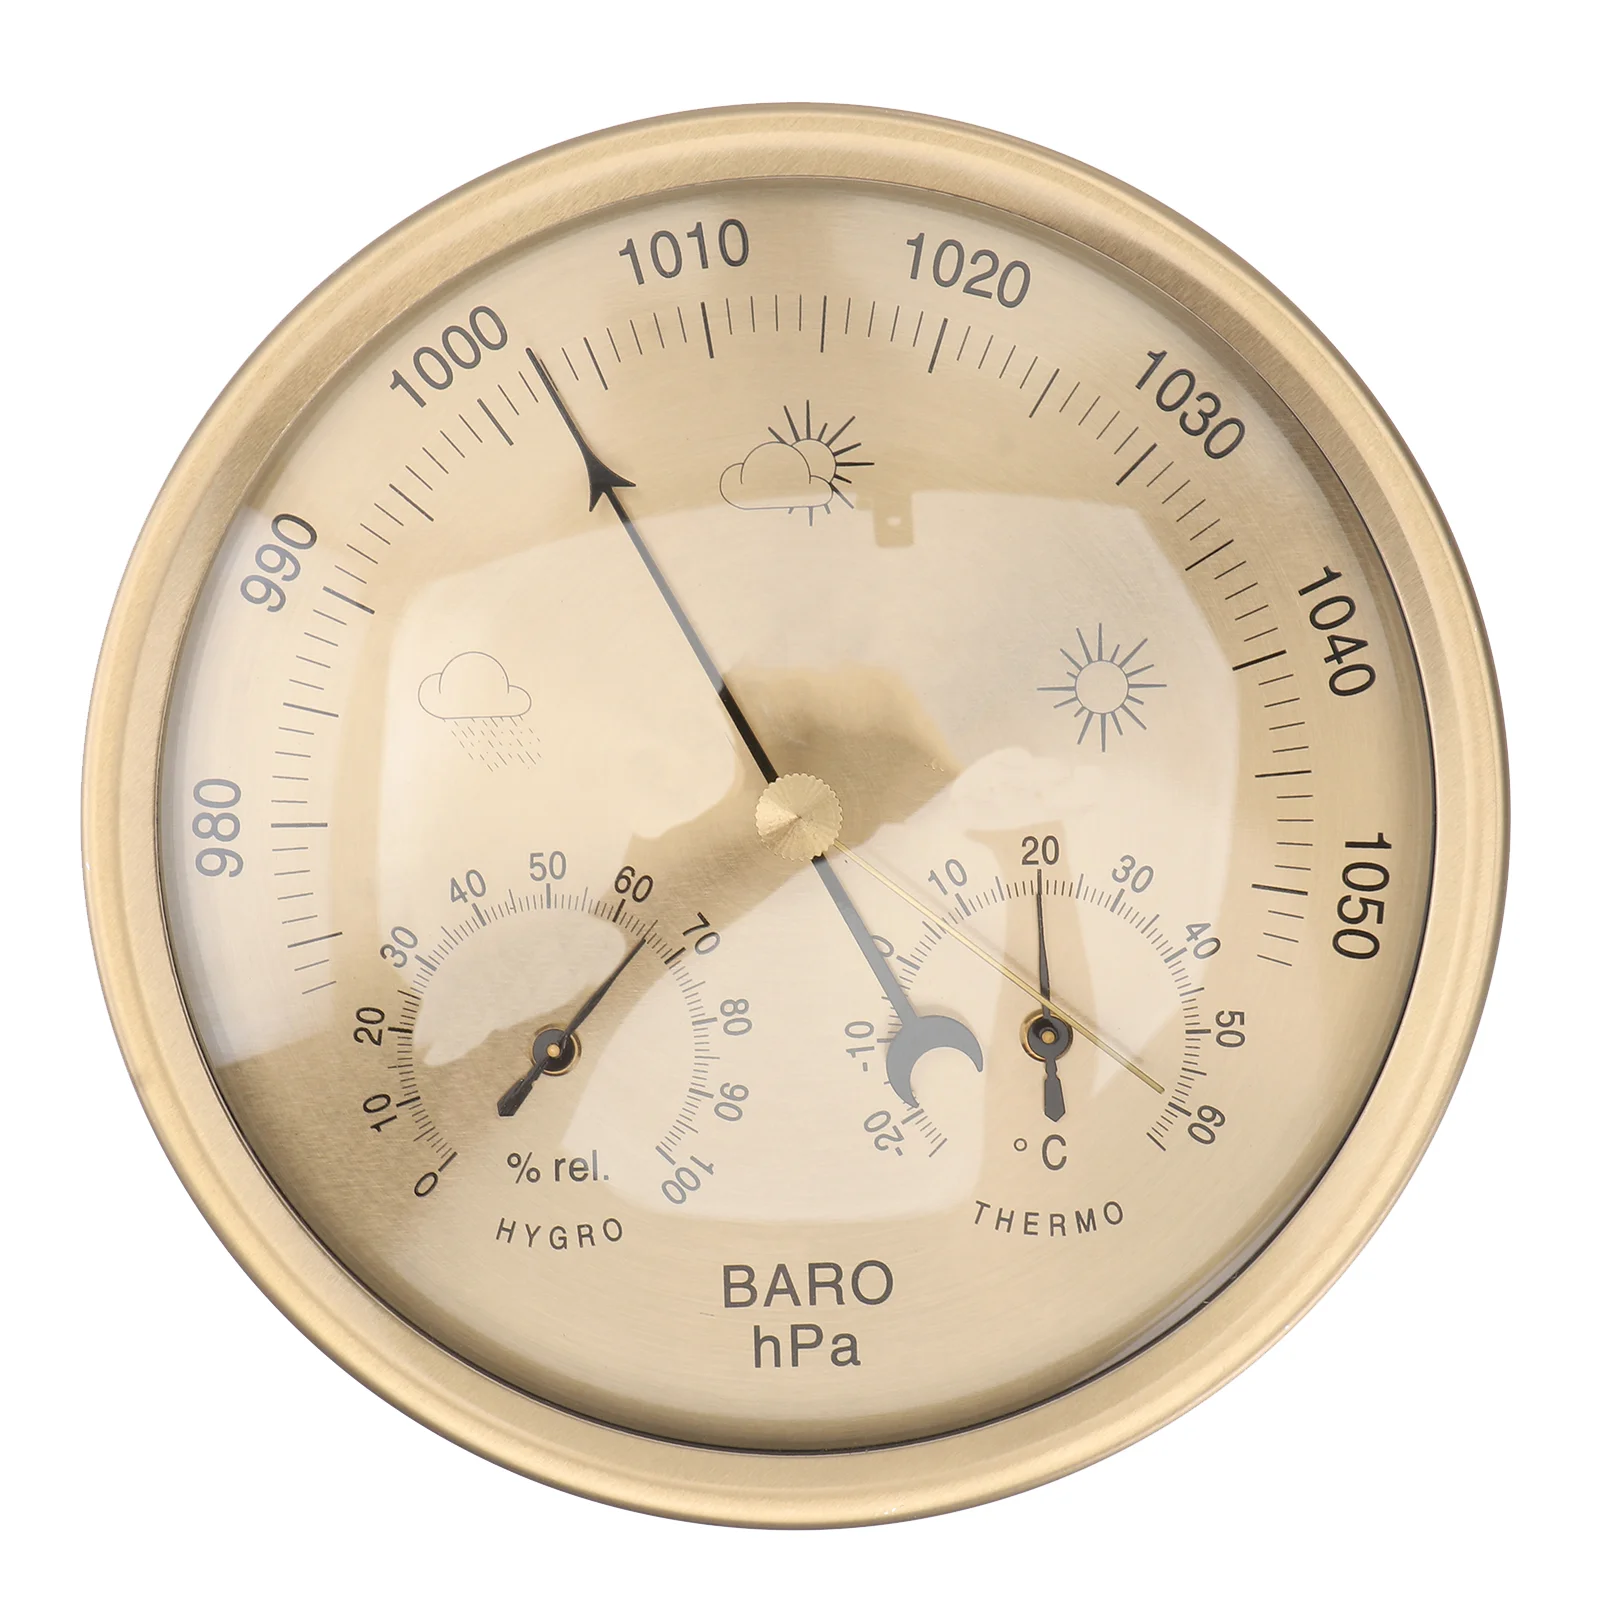 

3 in 1 Barometer Thermometer Hygrometer Dial Type Weather Station Air Pressure Temperature Humidity Meter